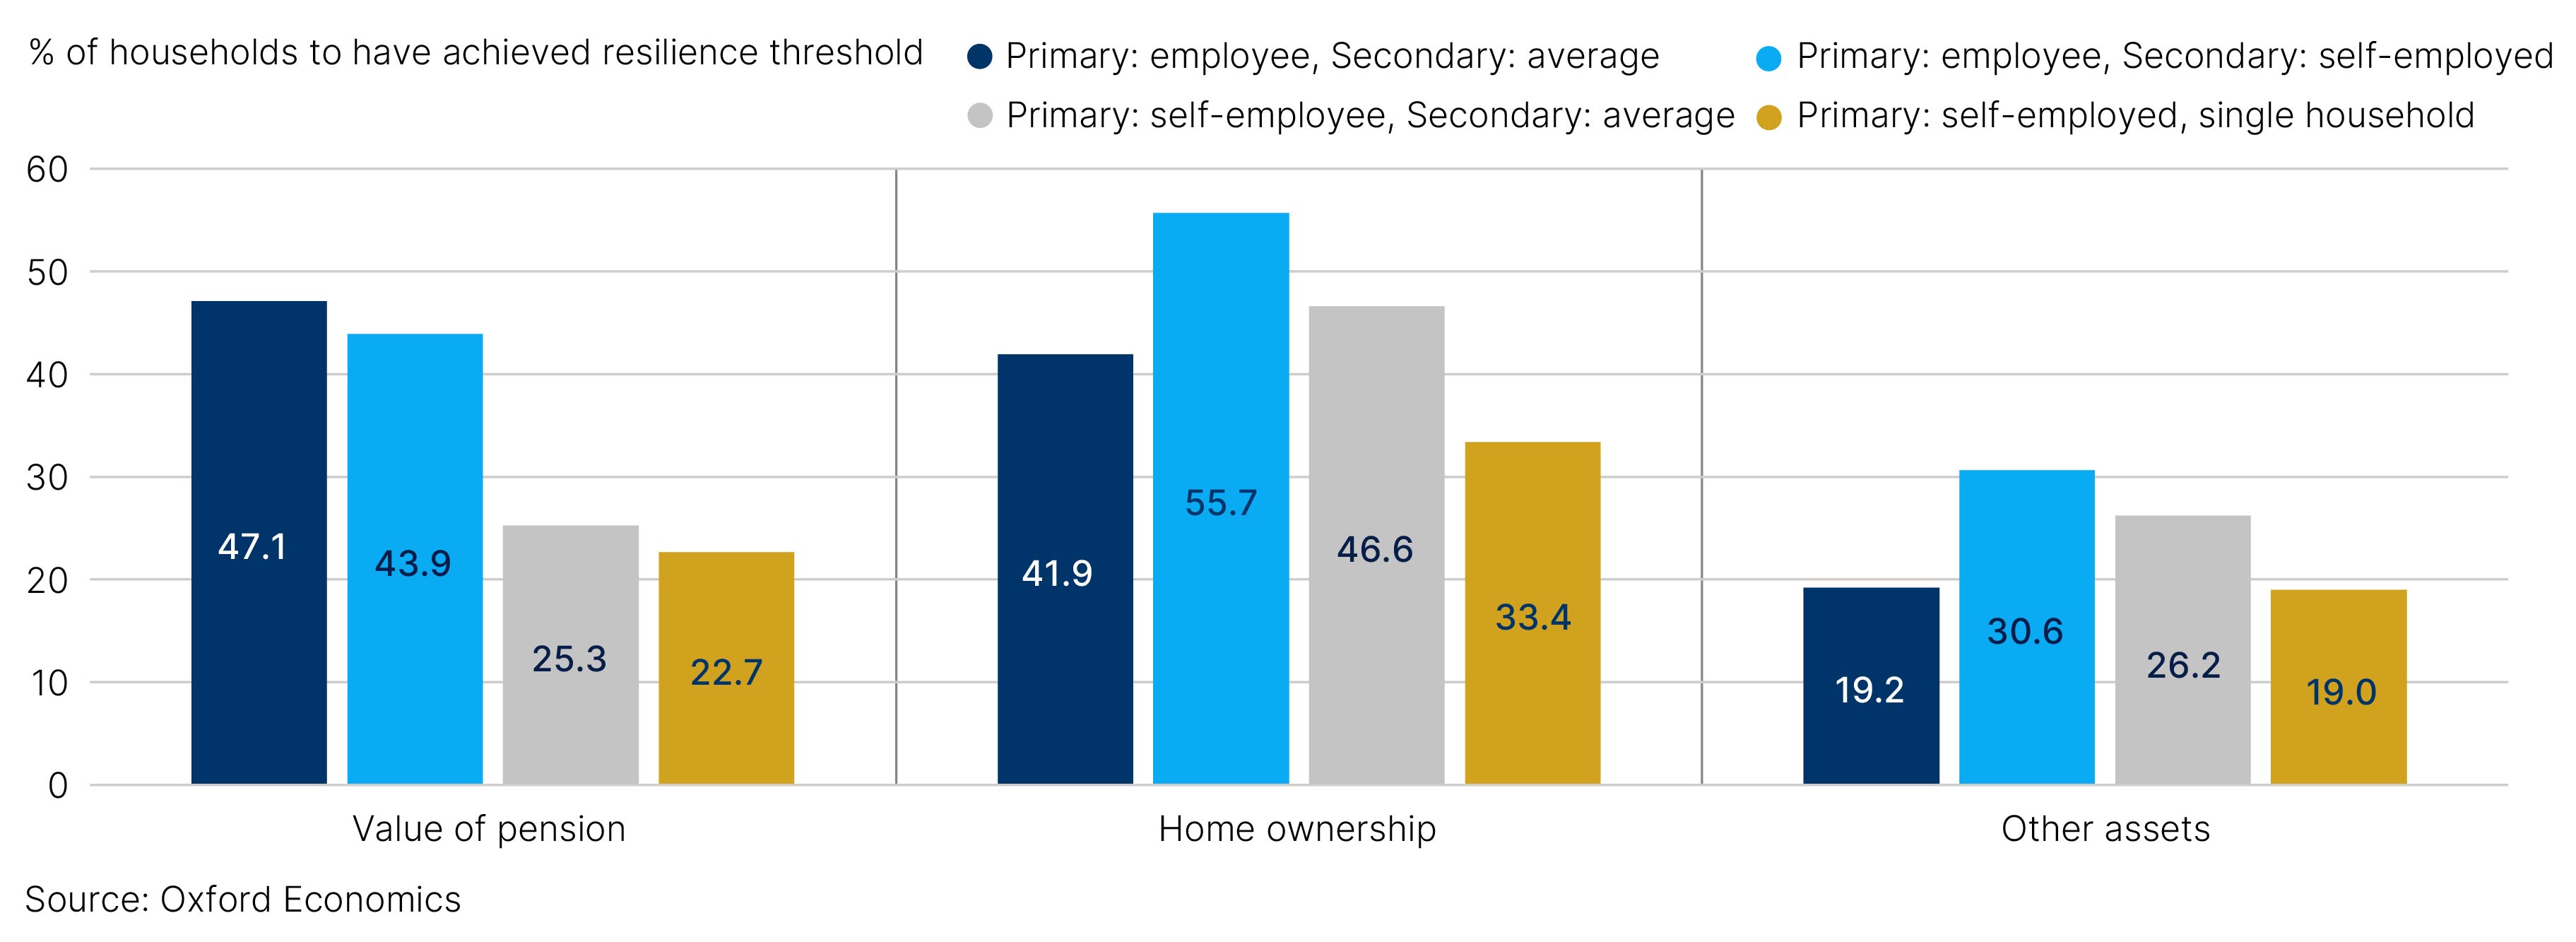 Fig. 9. Largest gaps between households seen in value for pension and home ownership